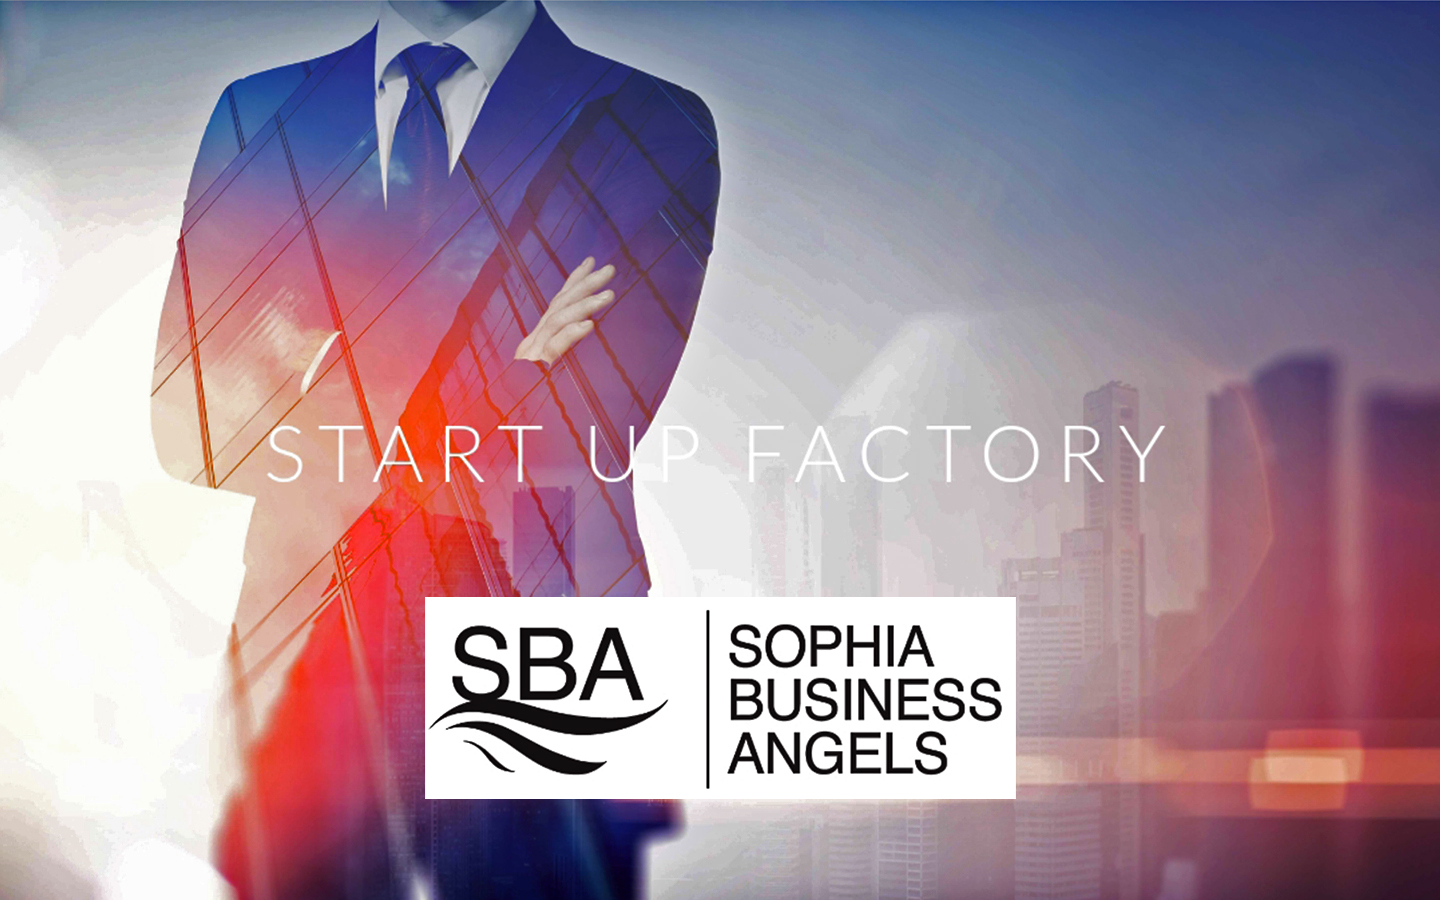 An opportunity to connect with business angels and incubators